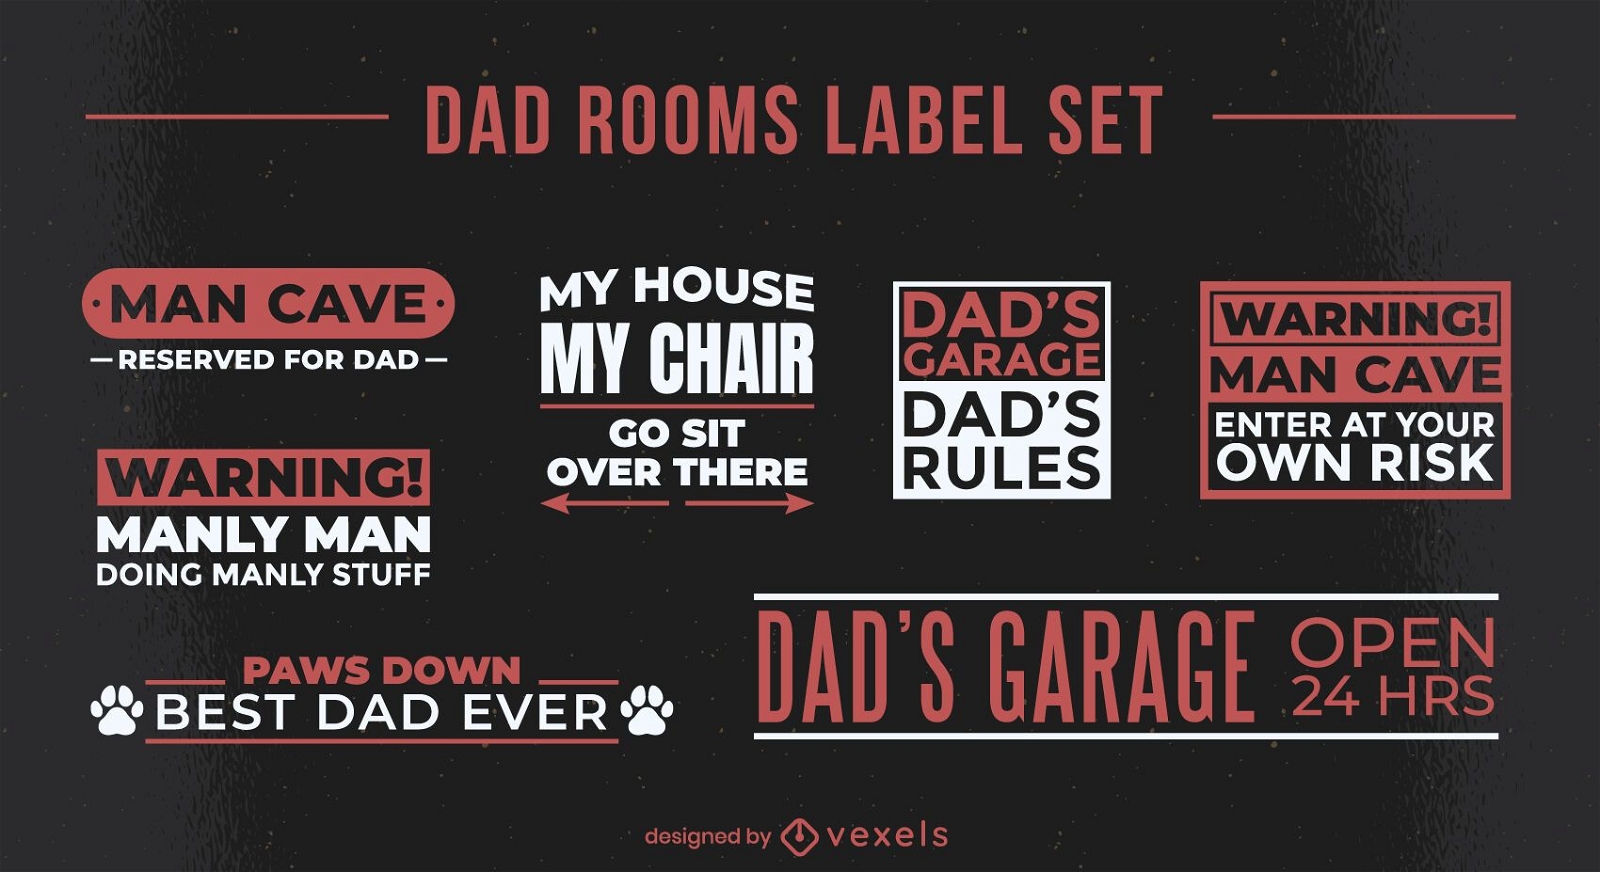 Dad's room cool quote label set